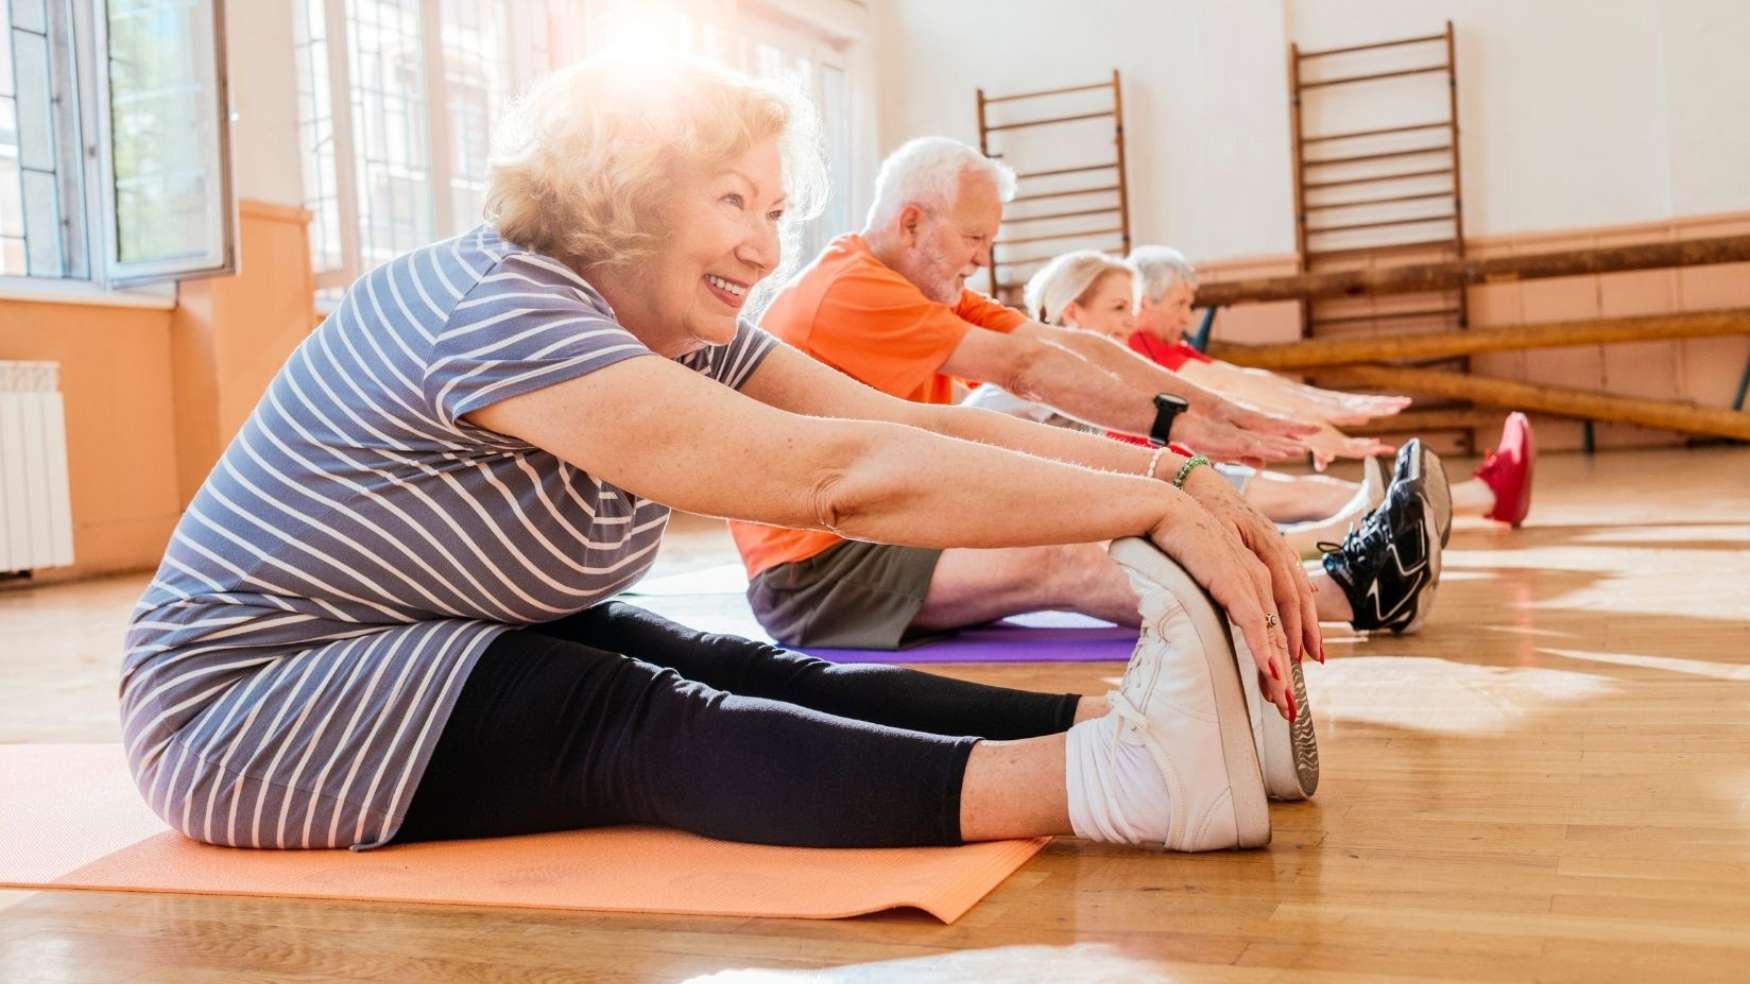 Image of older adults stretching.